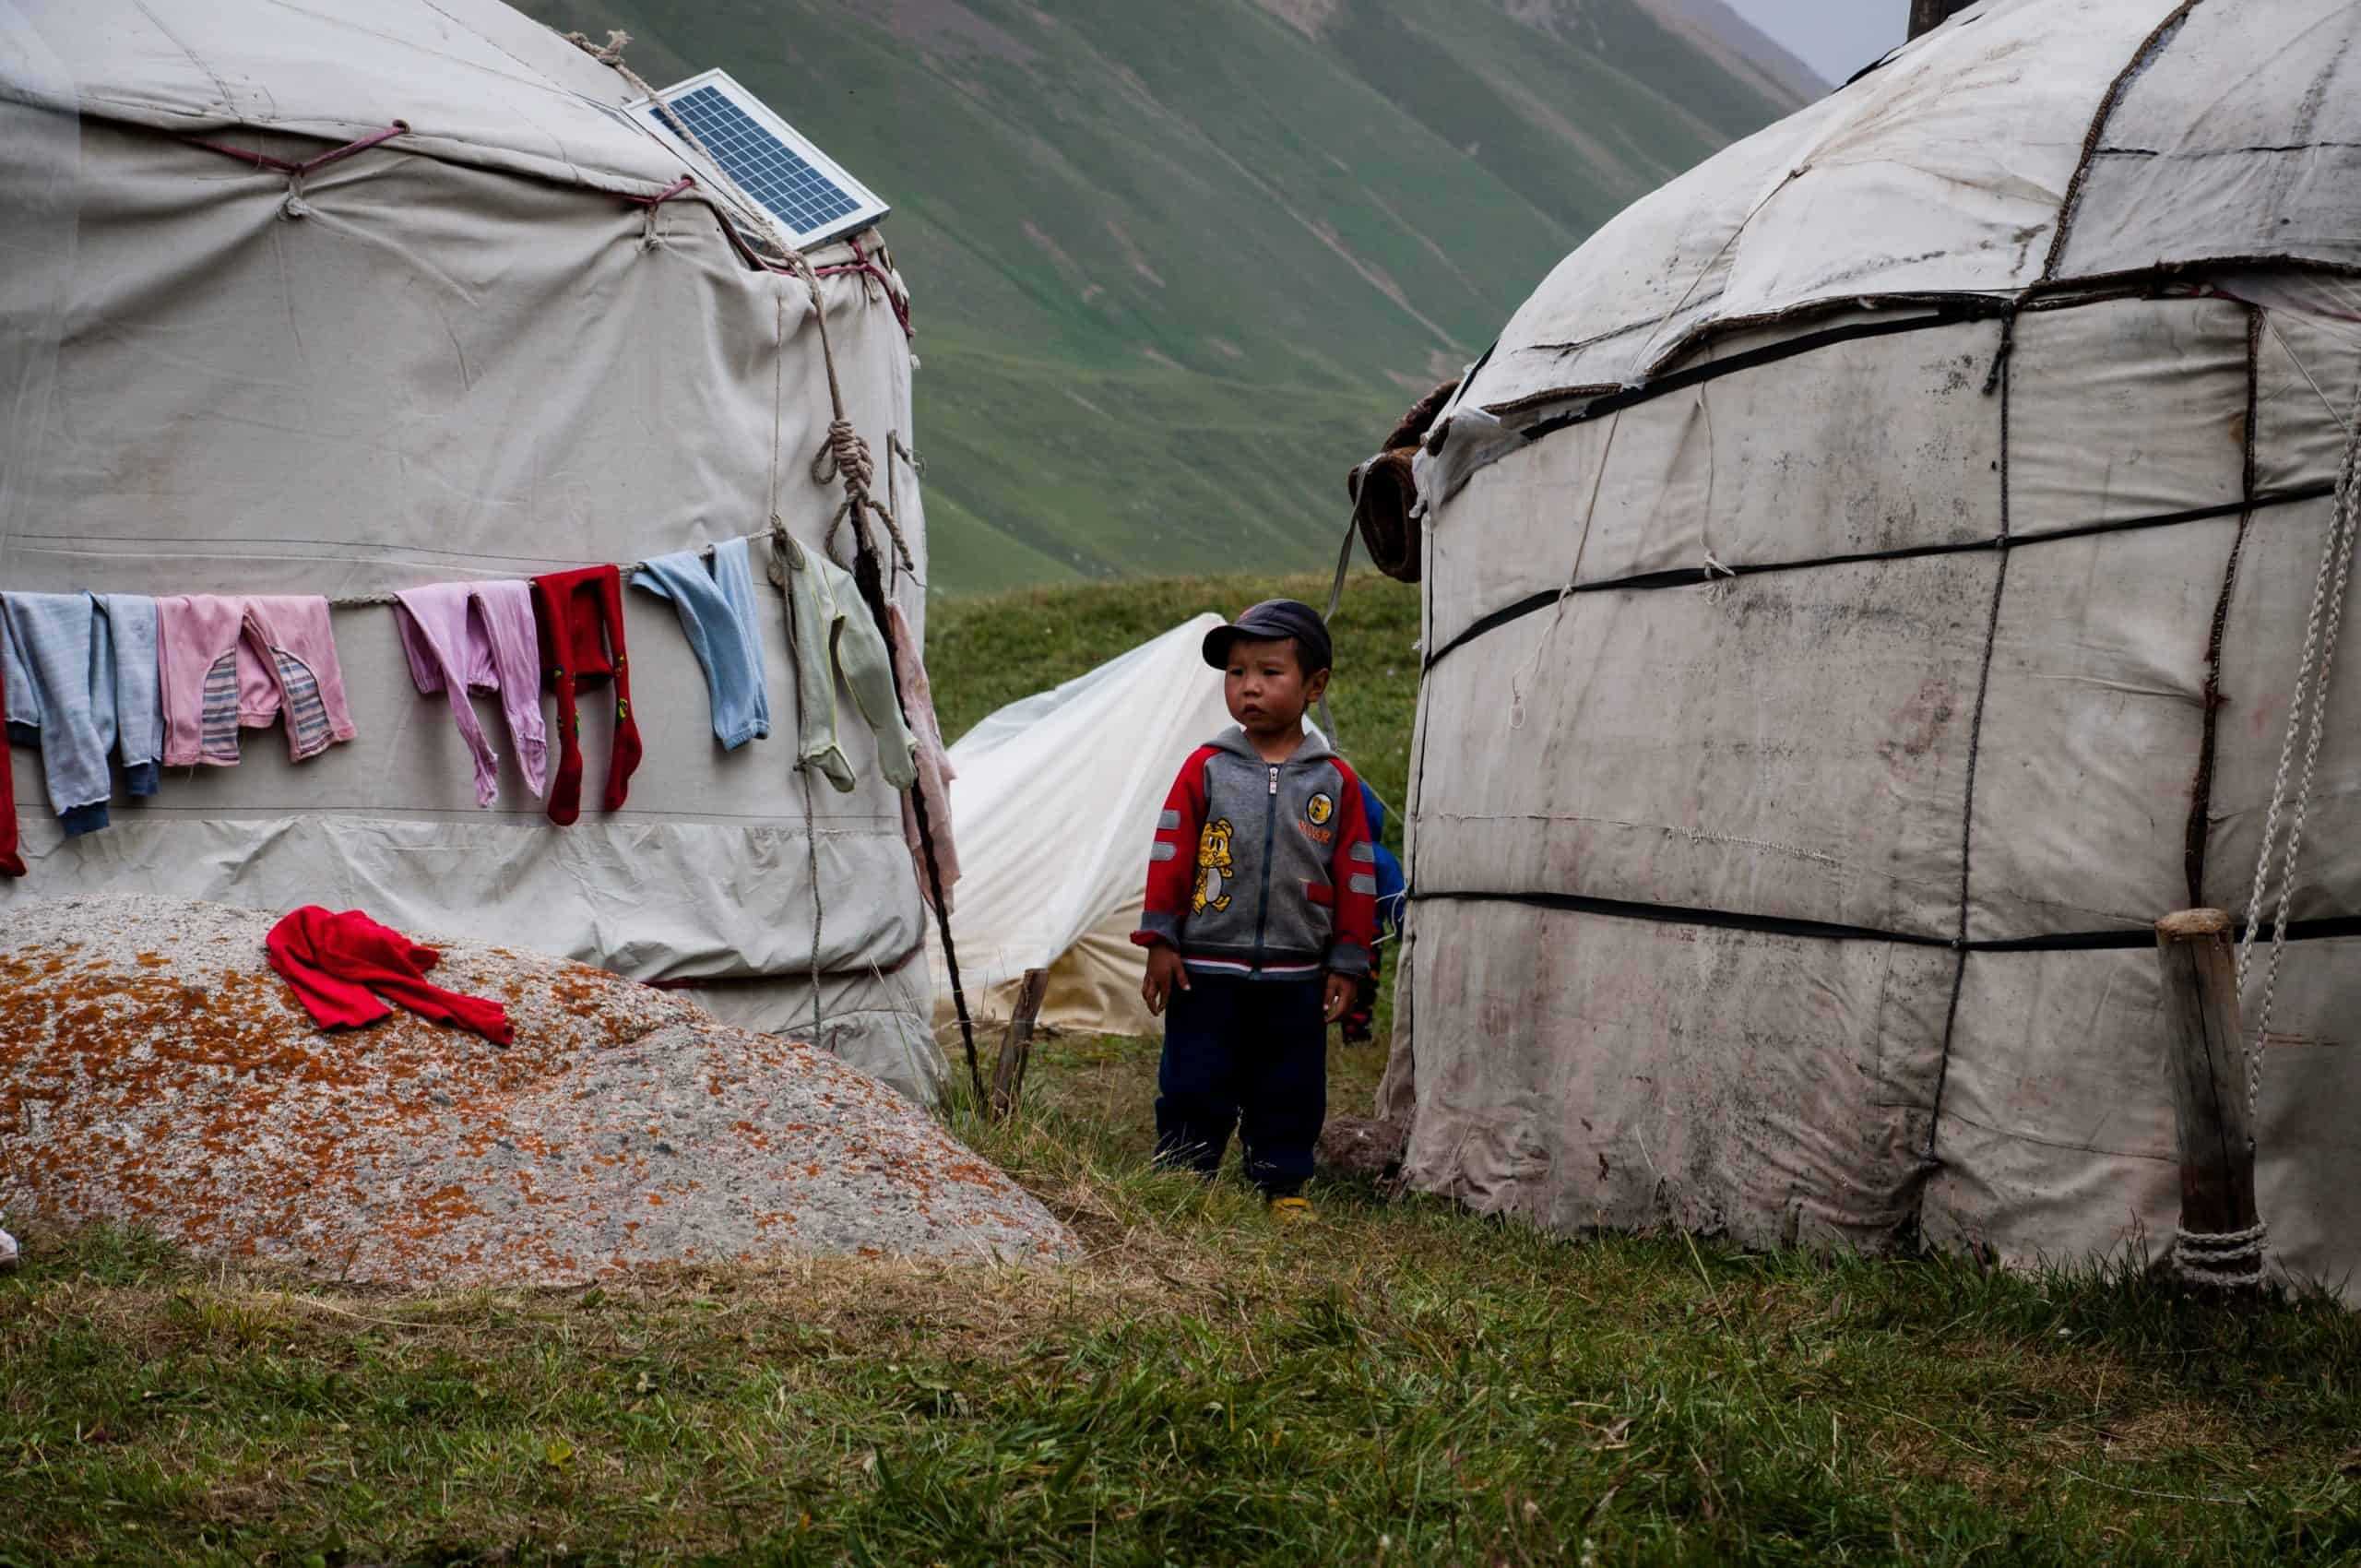 Boy outside of tents with laundry hung in Kyrgyz Republic